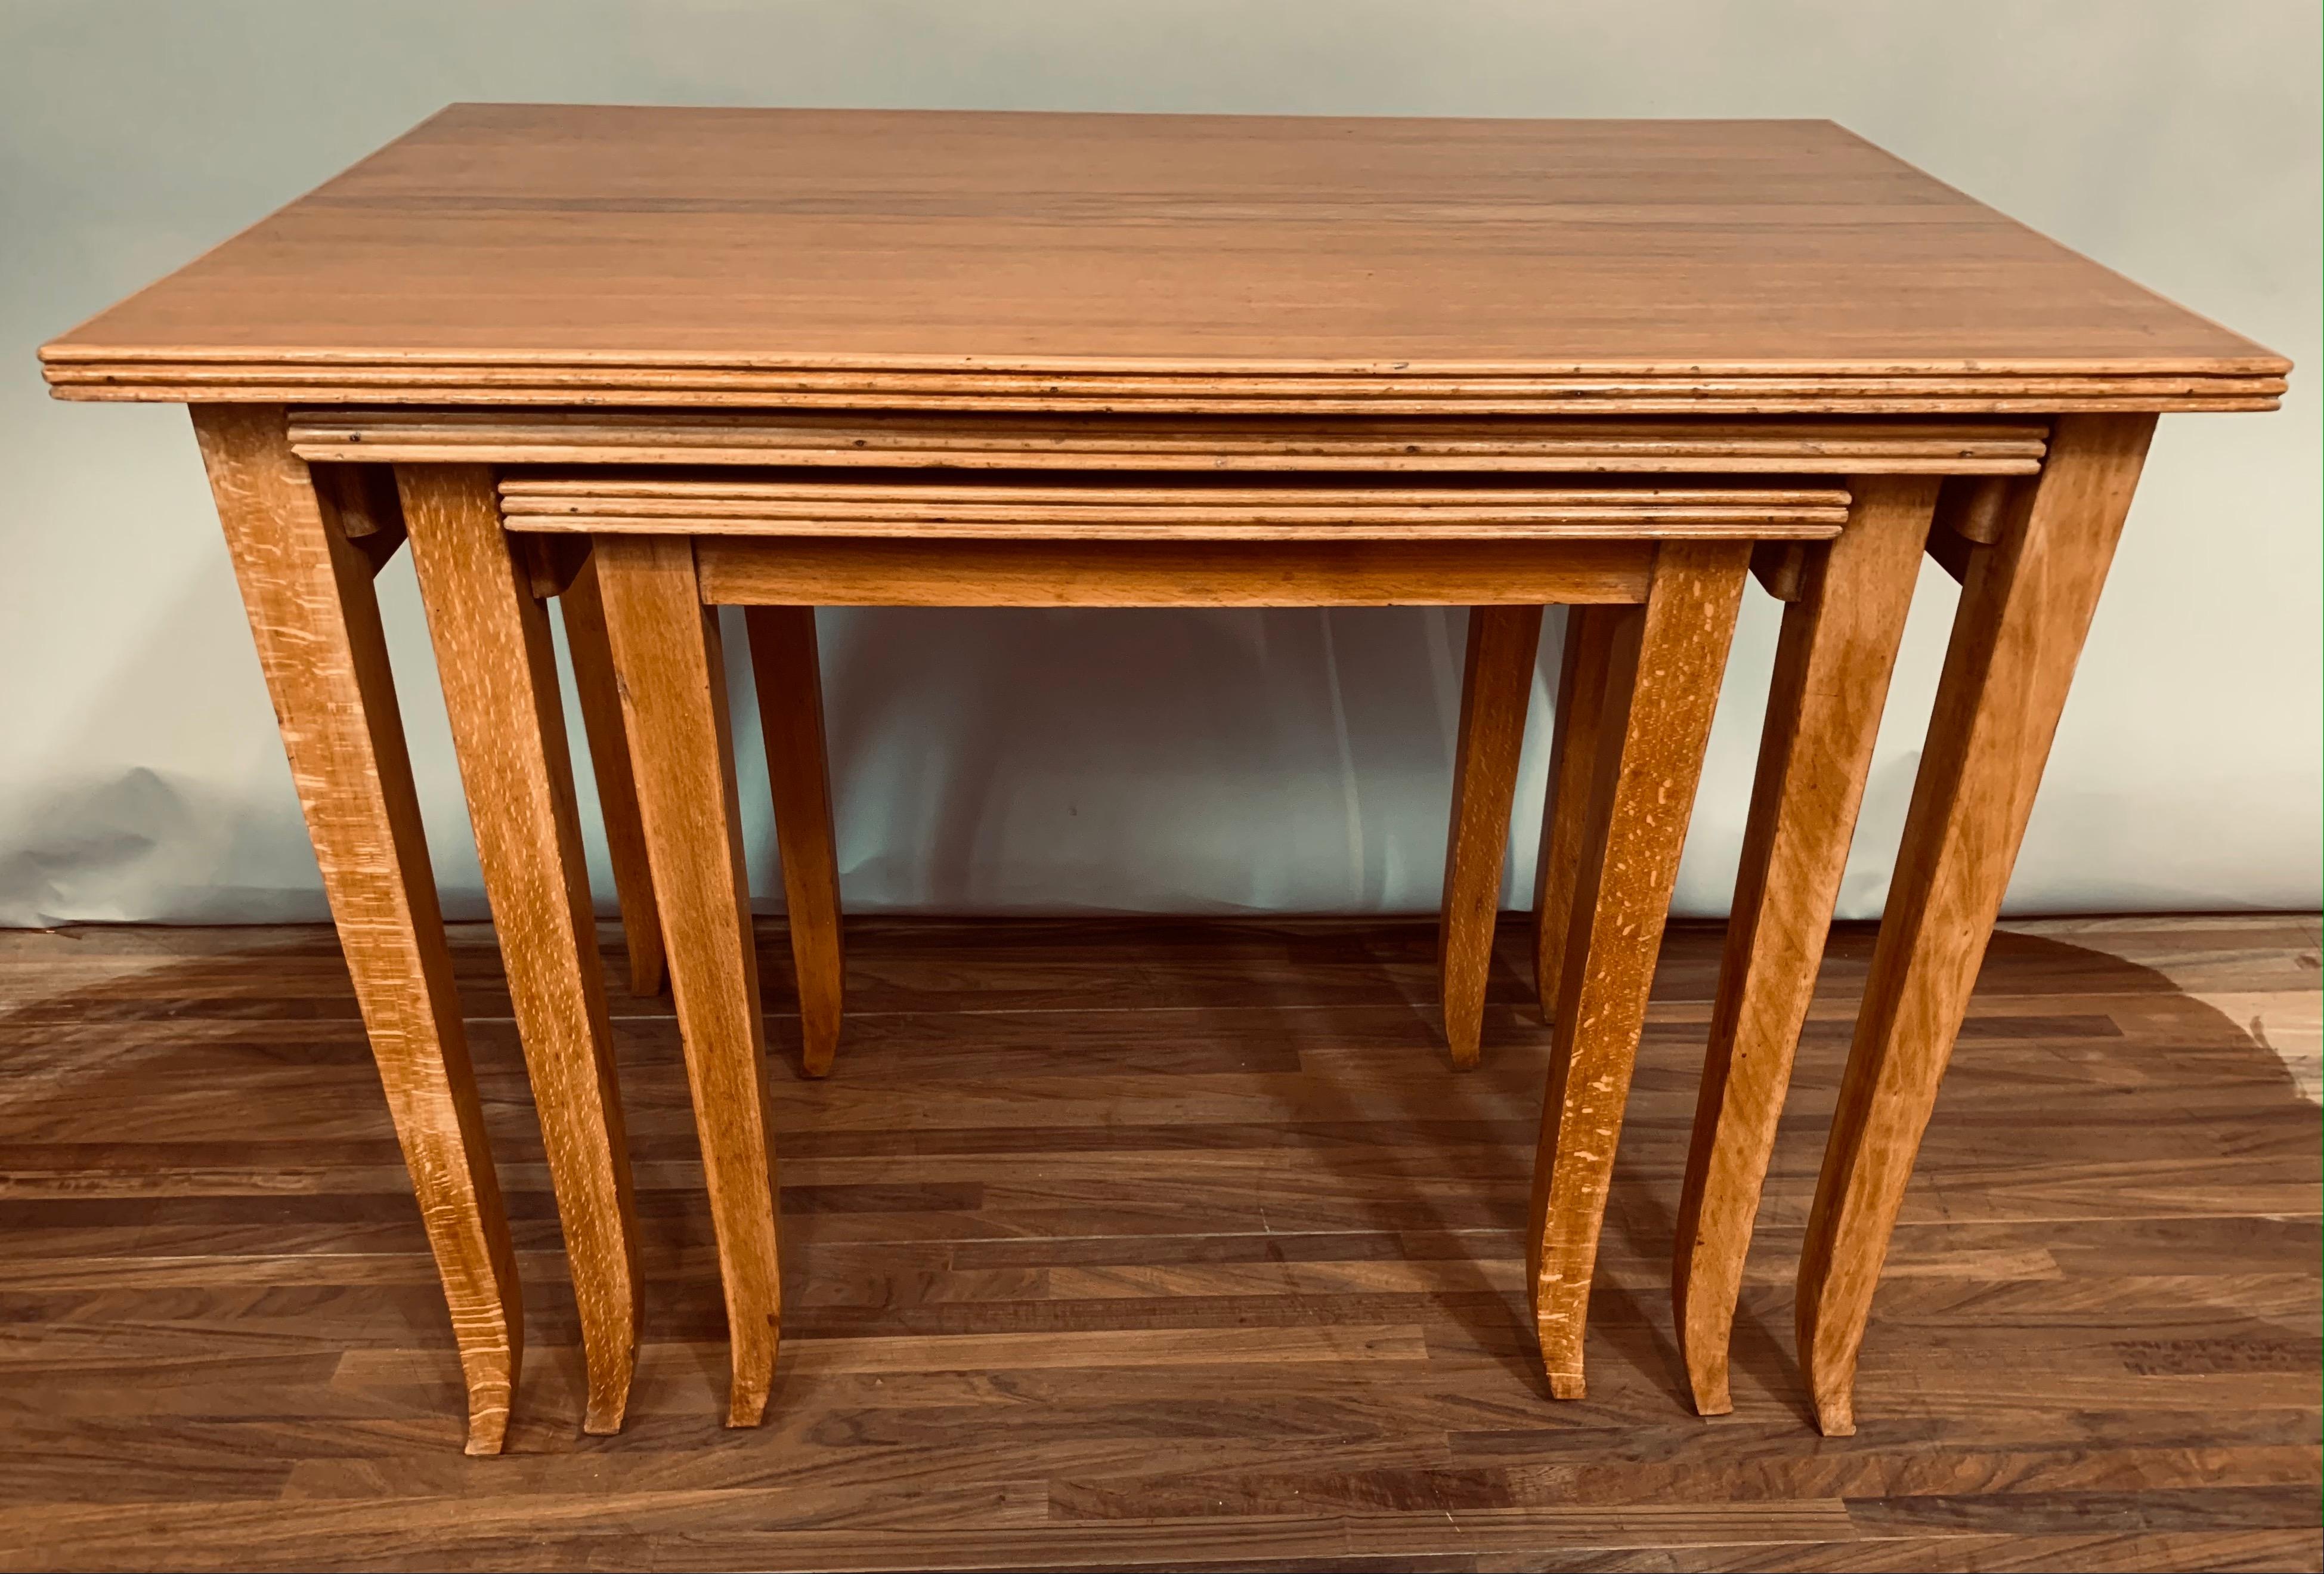 Set of 3, 1960s, nest of teak stackable tables. Made in England. Well-made, sturdy and fully functional. The tables have a wonderful deep and even grain. Designed to slot into one other when not in use and for storage purposes. The edge of each